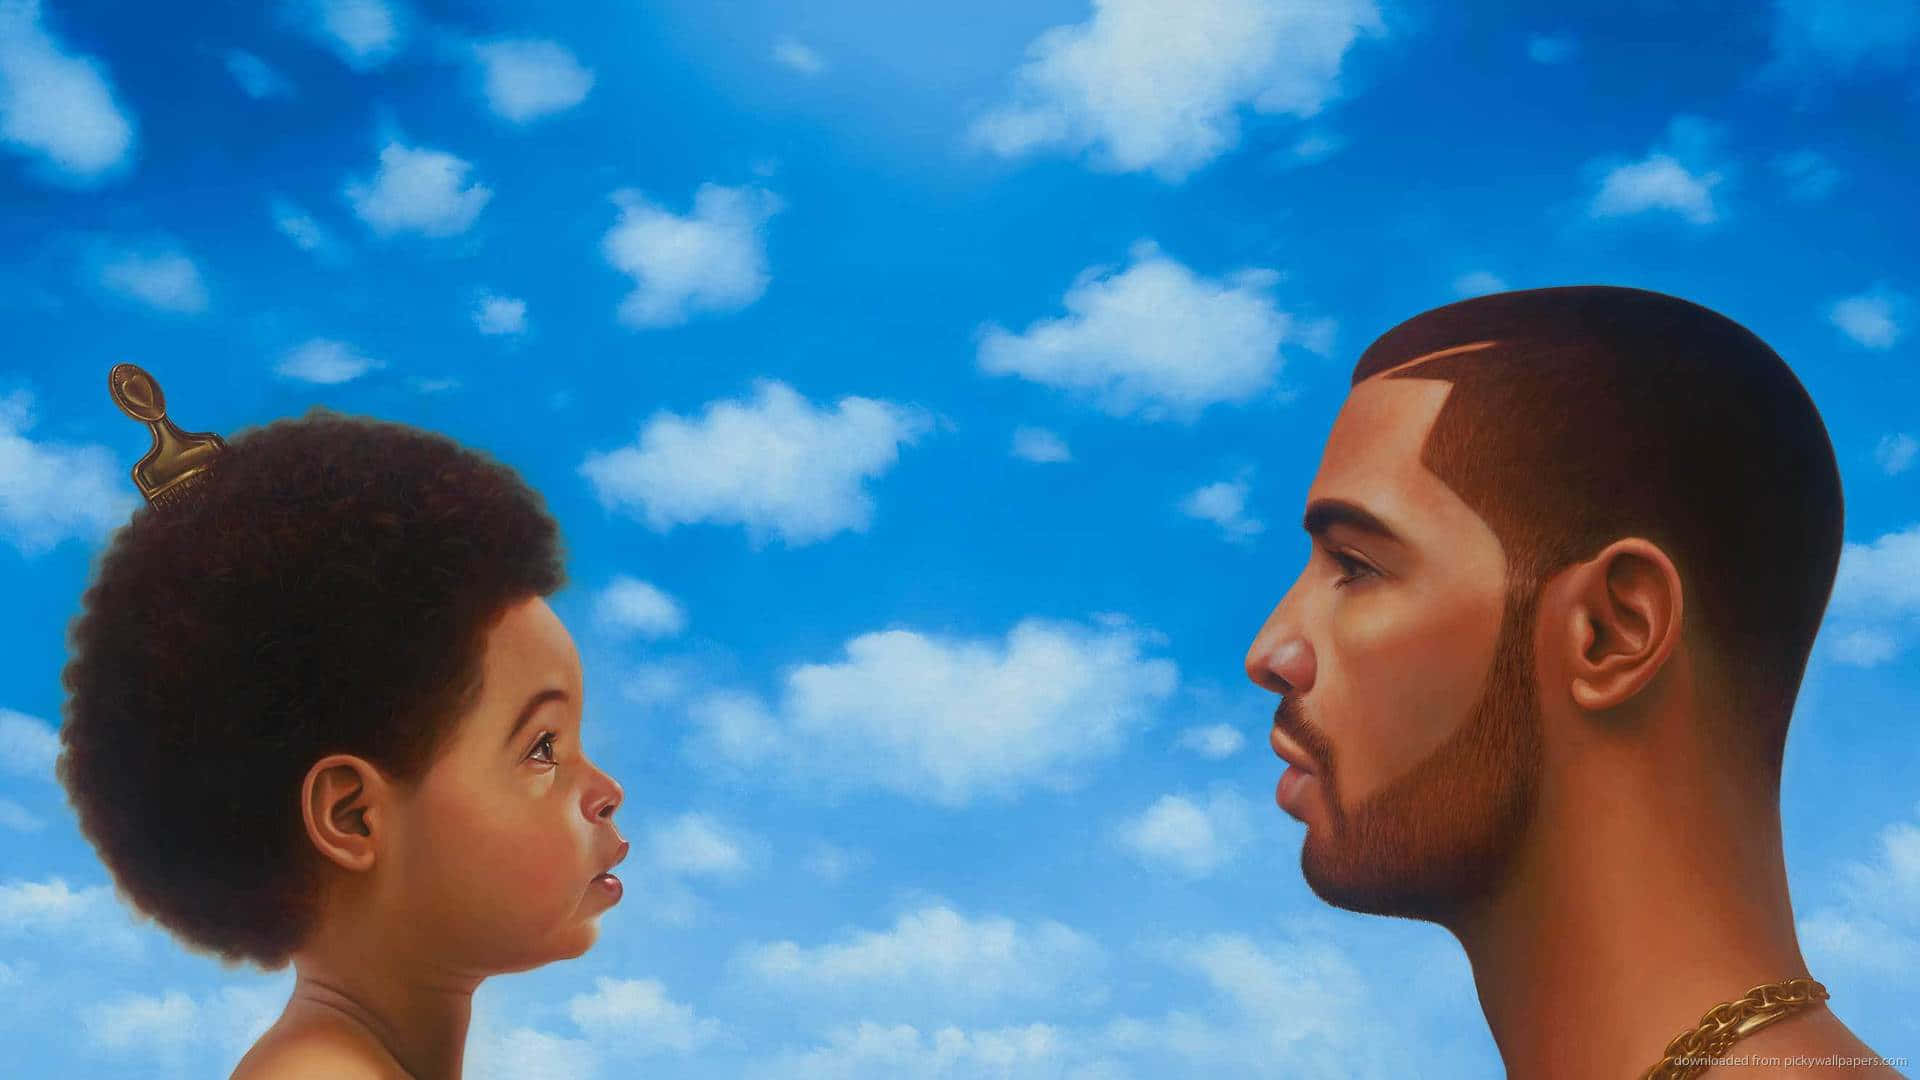 Drake And A Child Looking At Each Other In The Sky Wallpaper